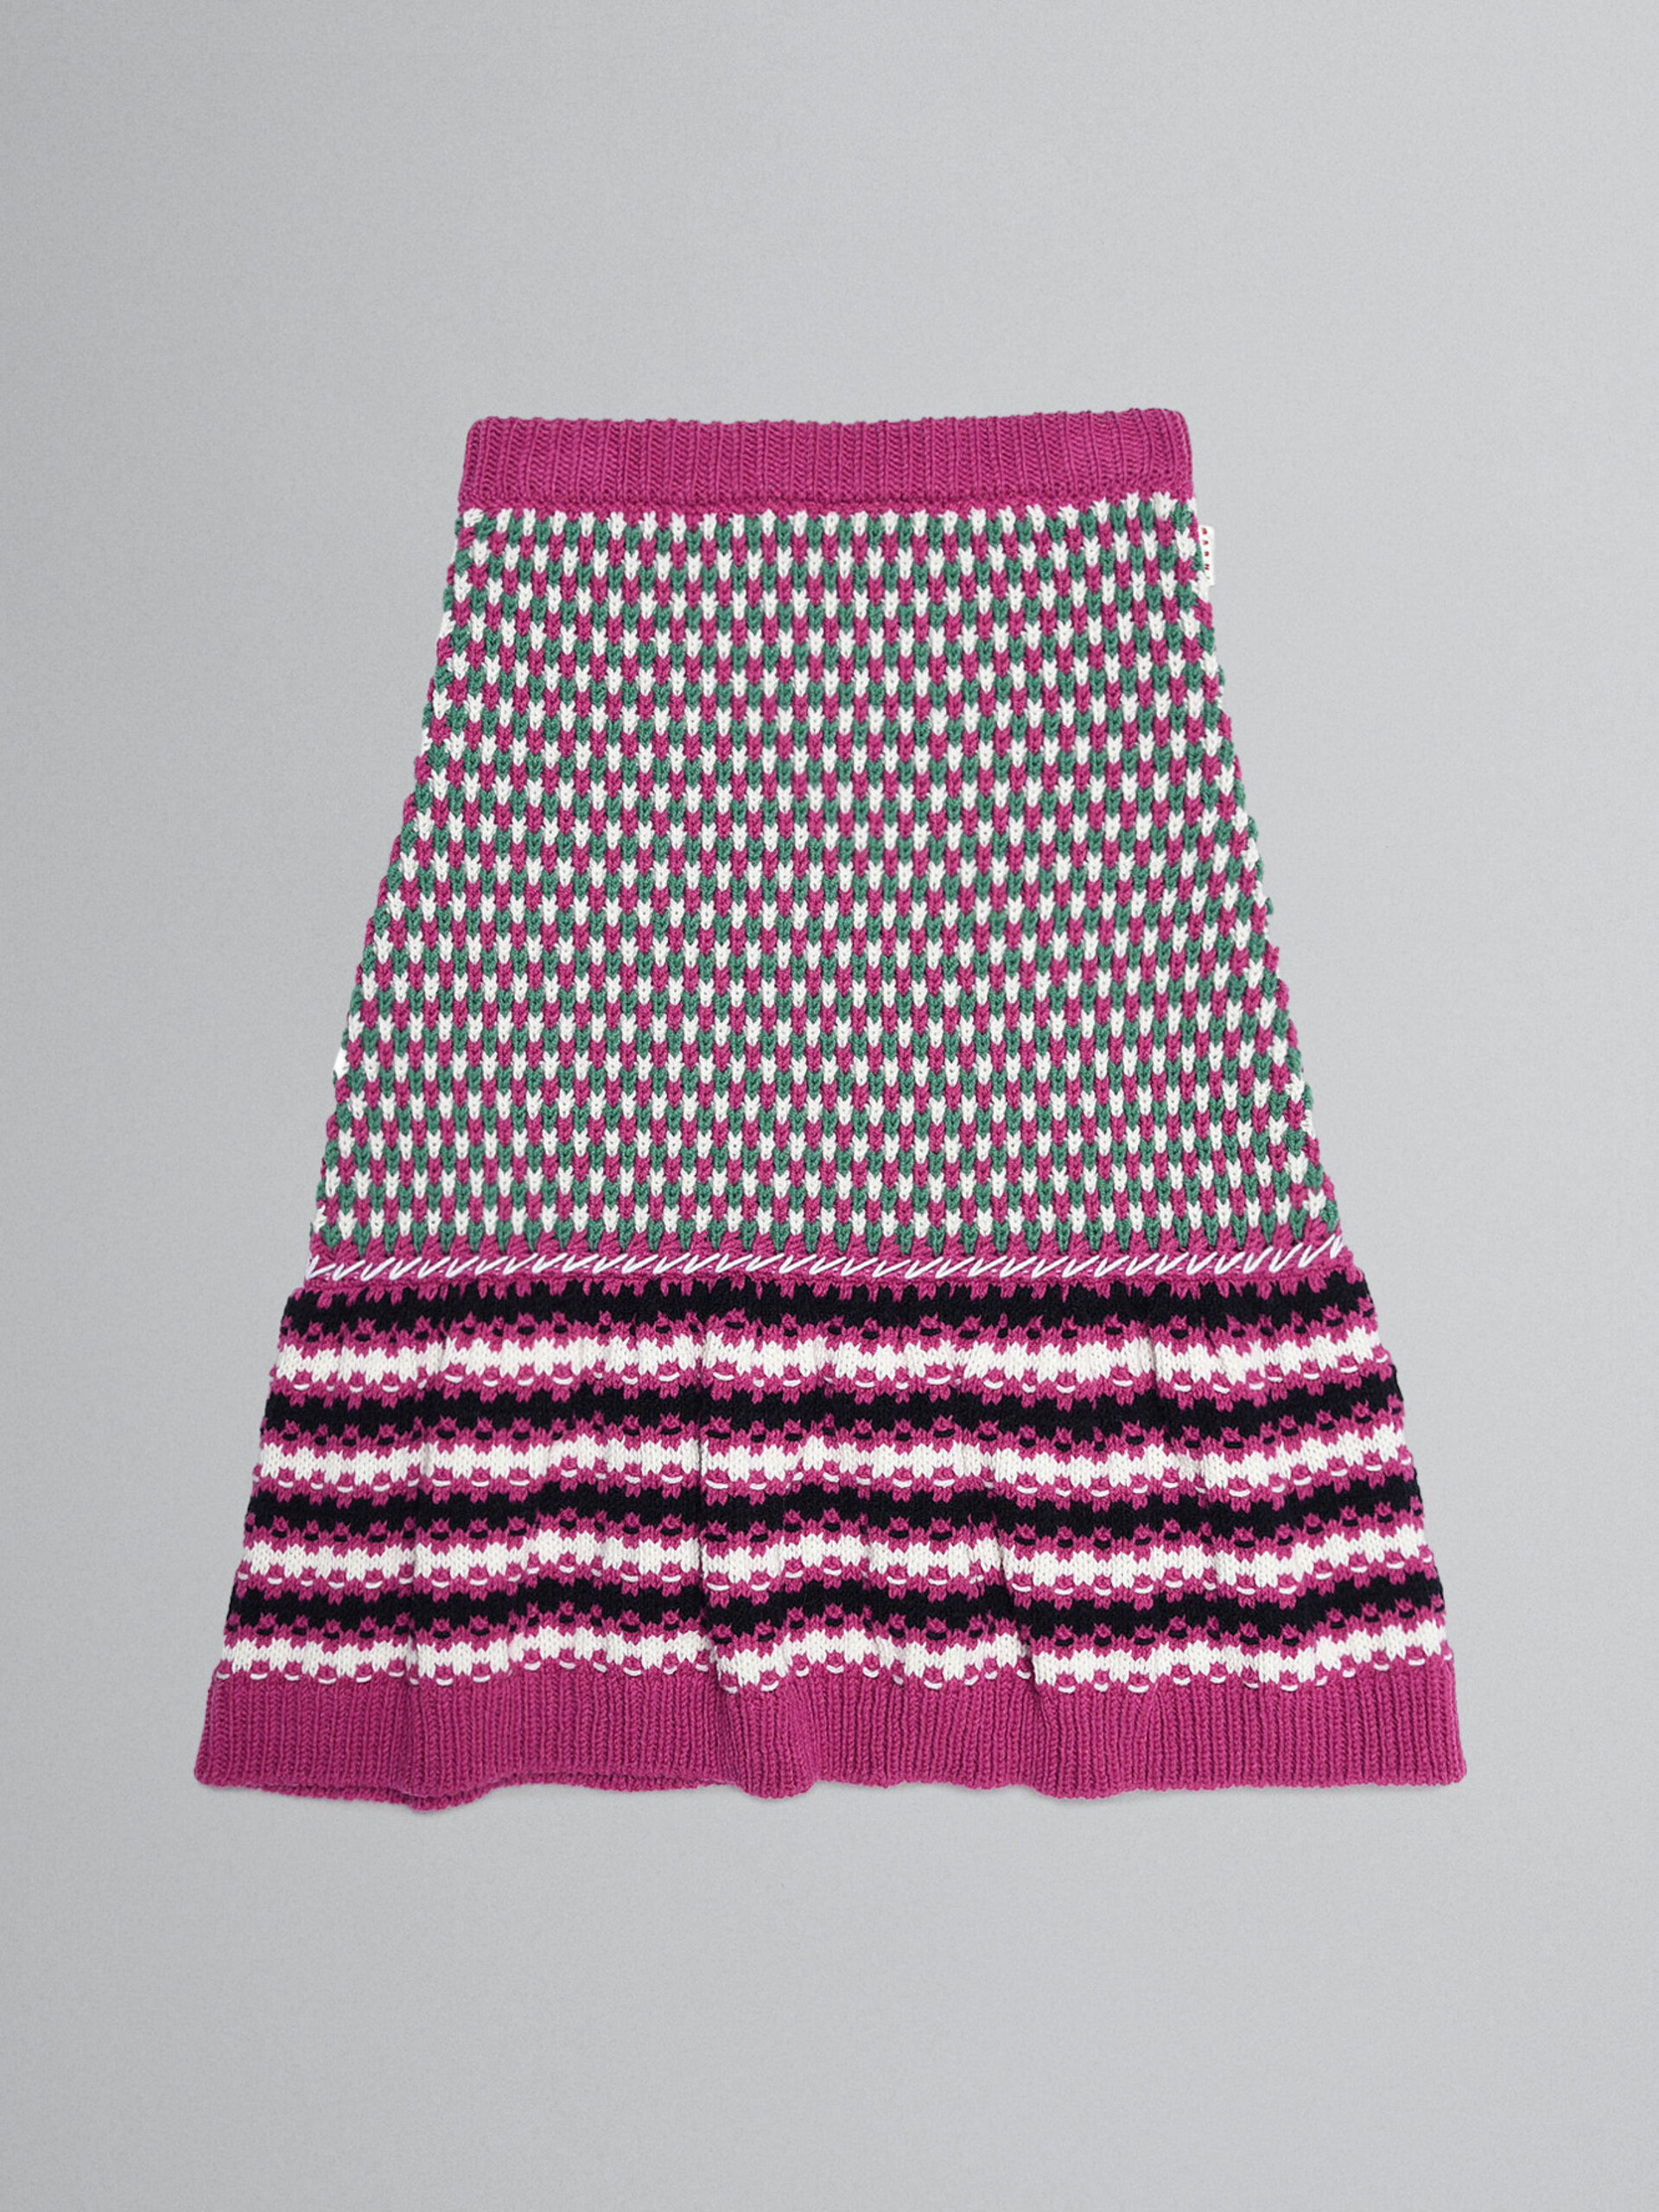 Multicolour knitted skirt with flounce hem - Skirts - Image 1